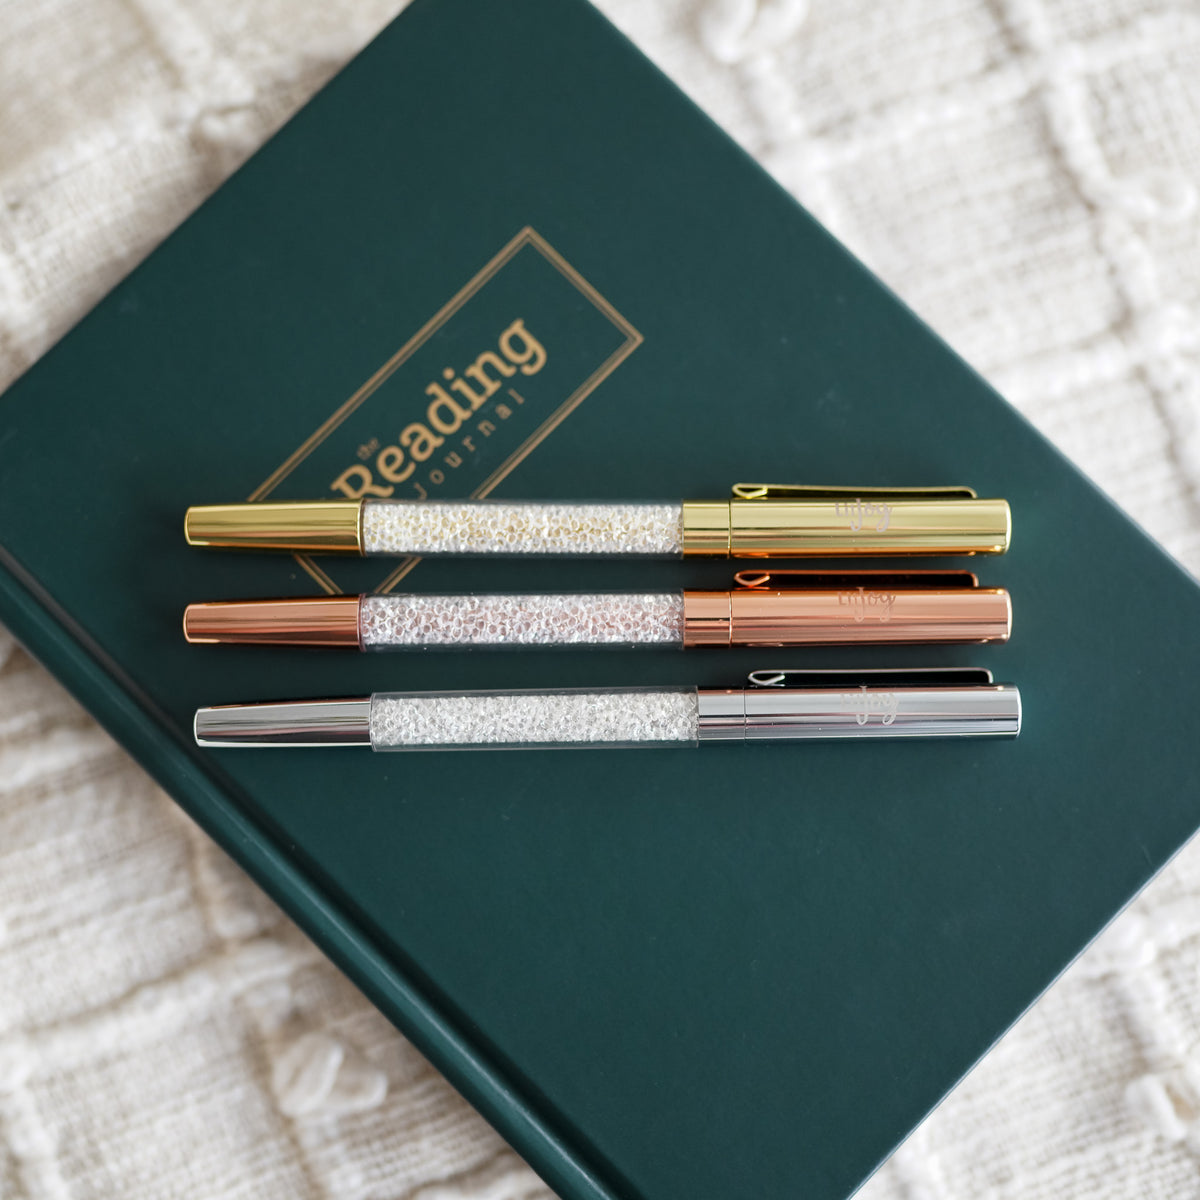 Crystal Pen with metallic details in gold, rose gold, and silver and LitJoy logo on the cap